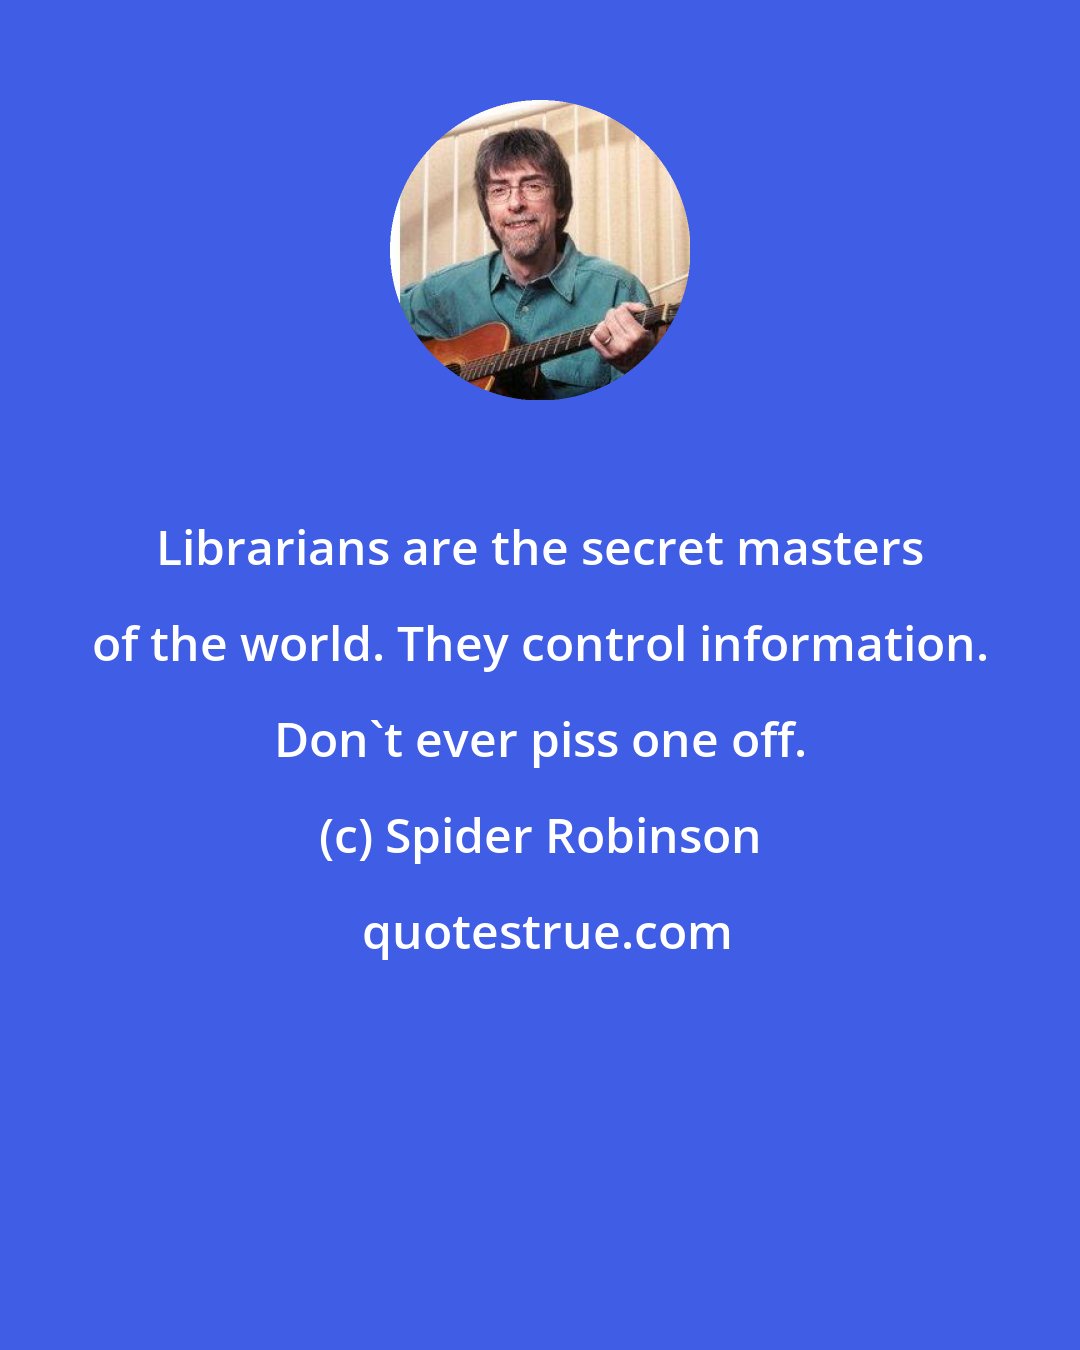 Spider Robinson: Librarians are the secret masters of the world. They control information. Don't ever piss one off.